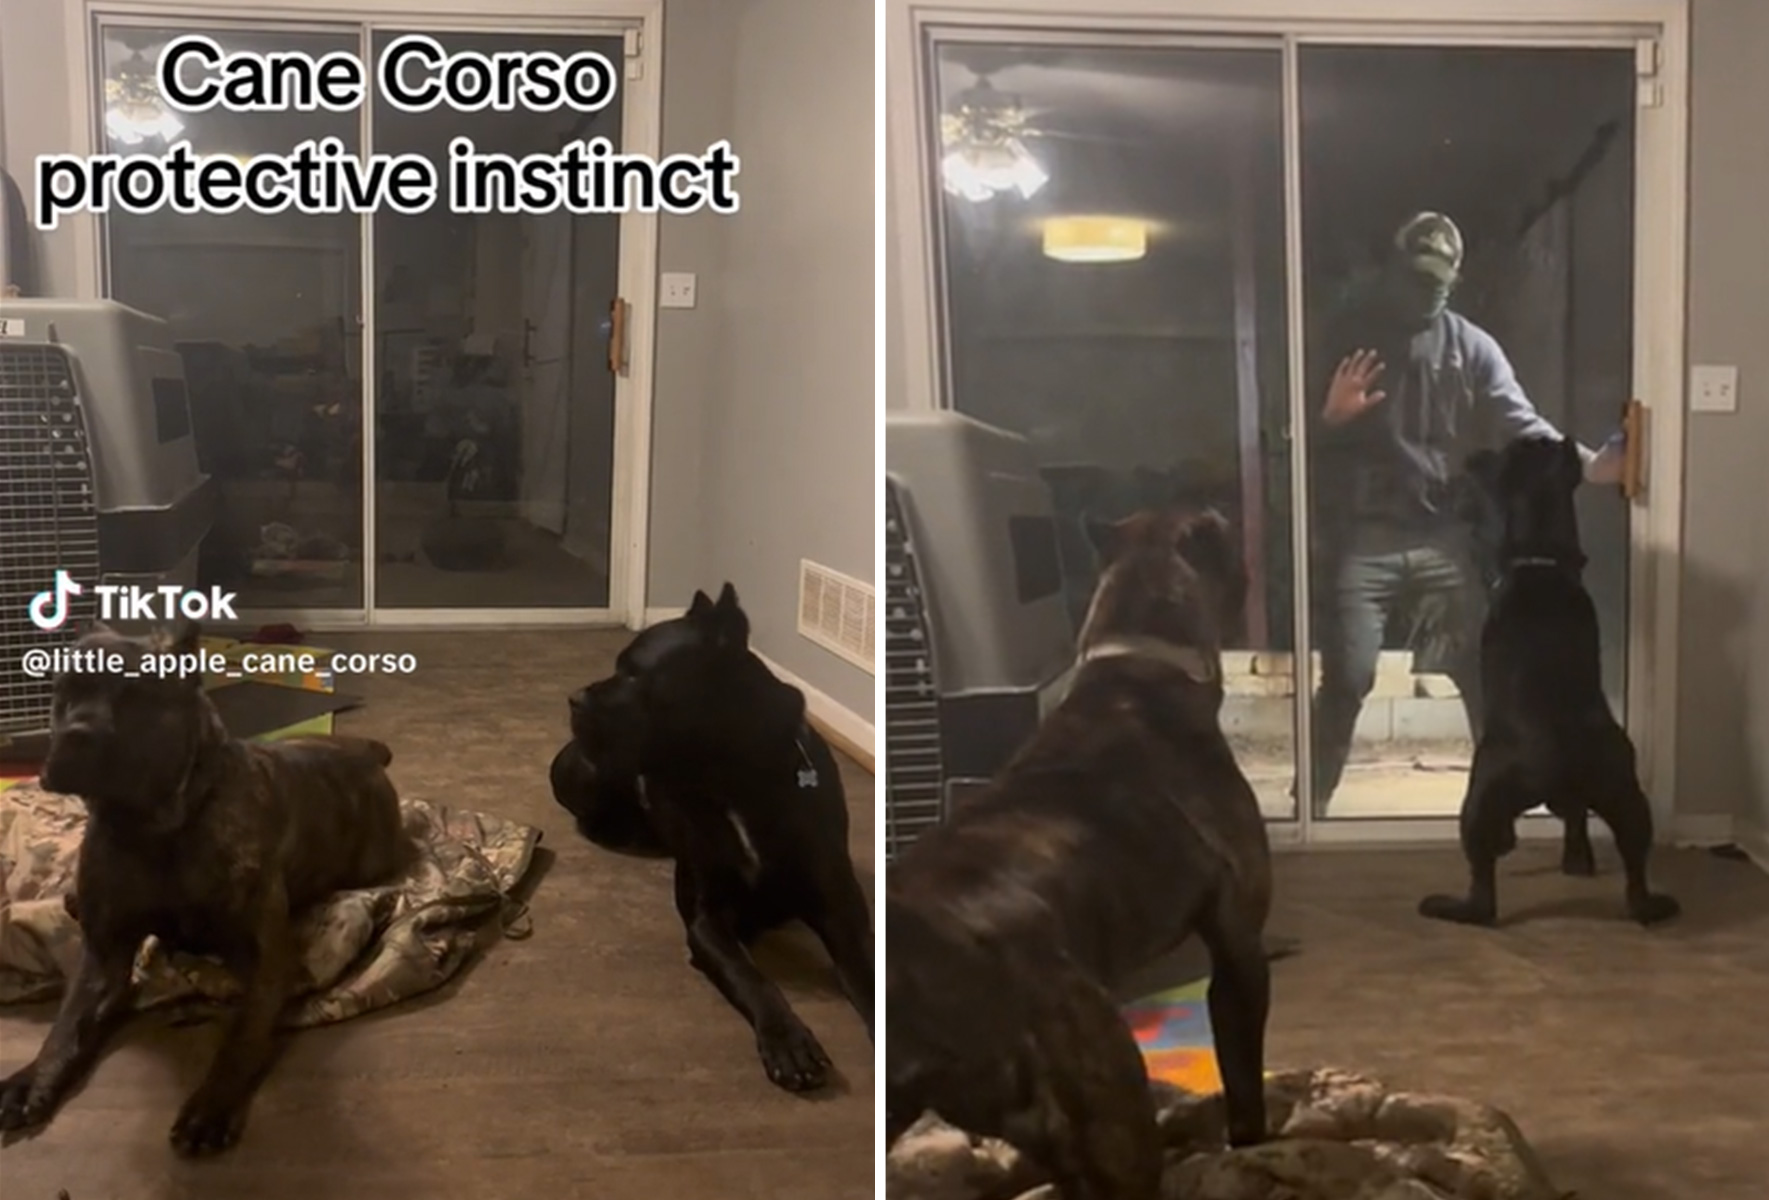 will a cane corso attack its owner?